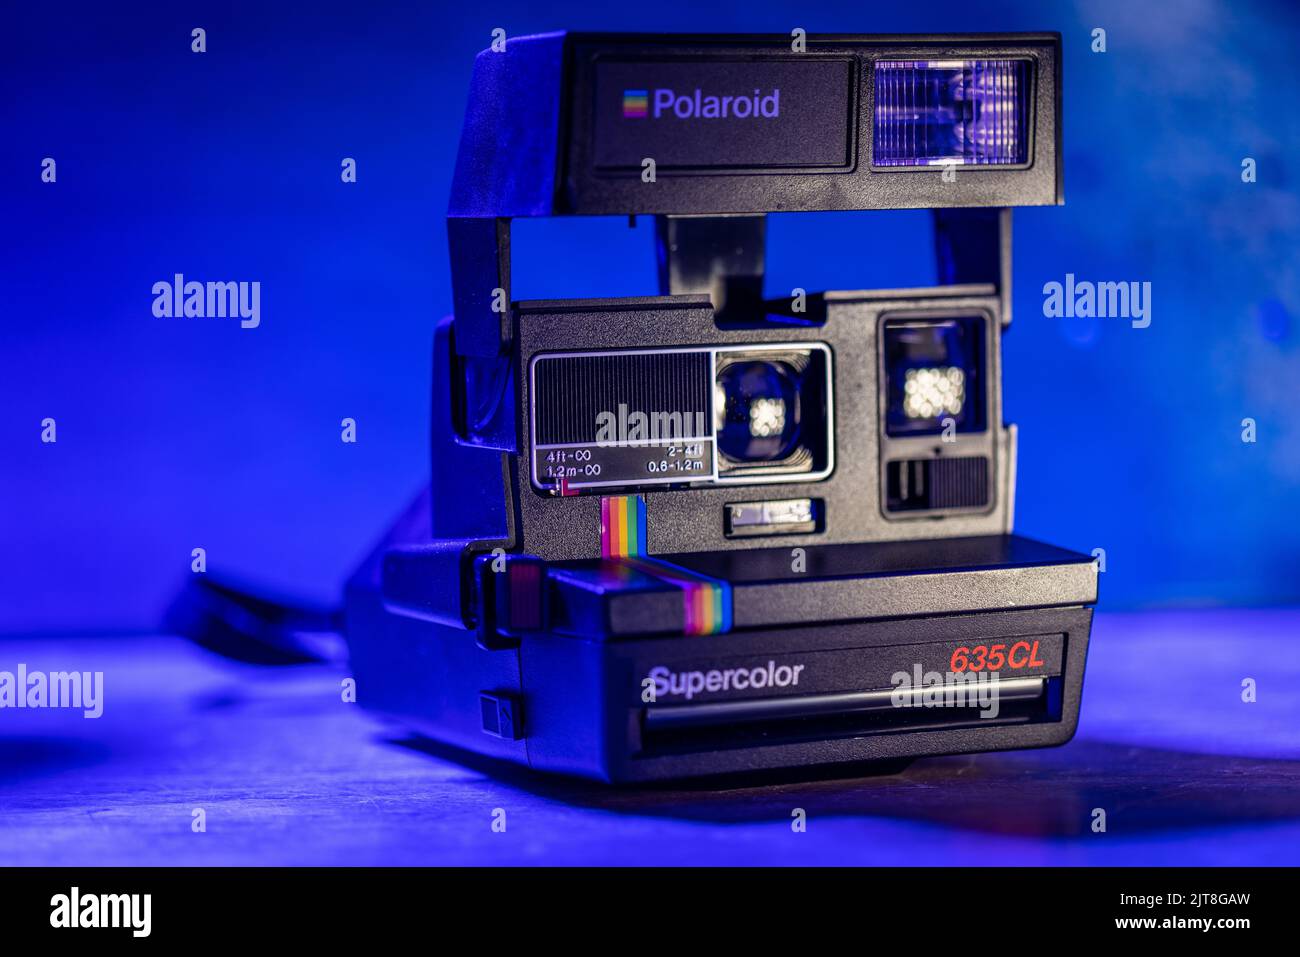 A closeup of a Polaroid Supercolor 635CL camera with blue background  lighting Stock Photo - Alamy